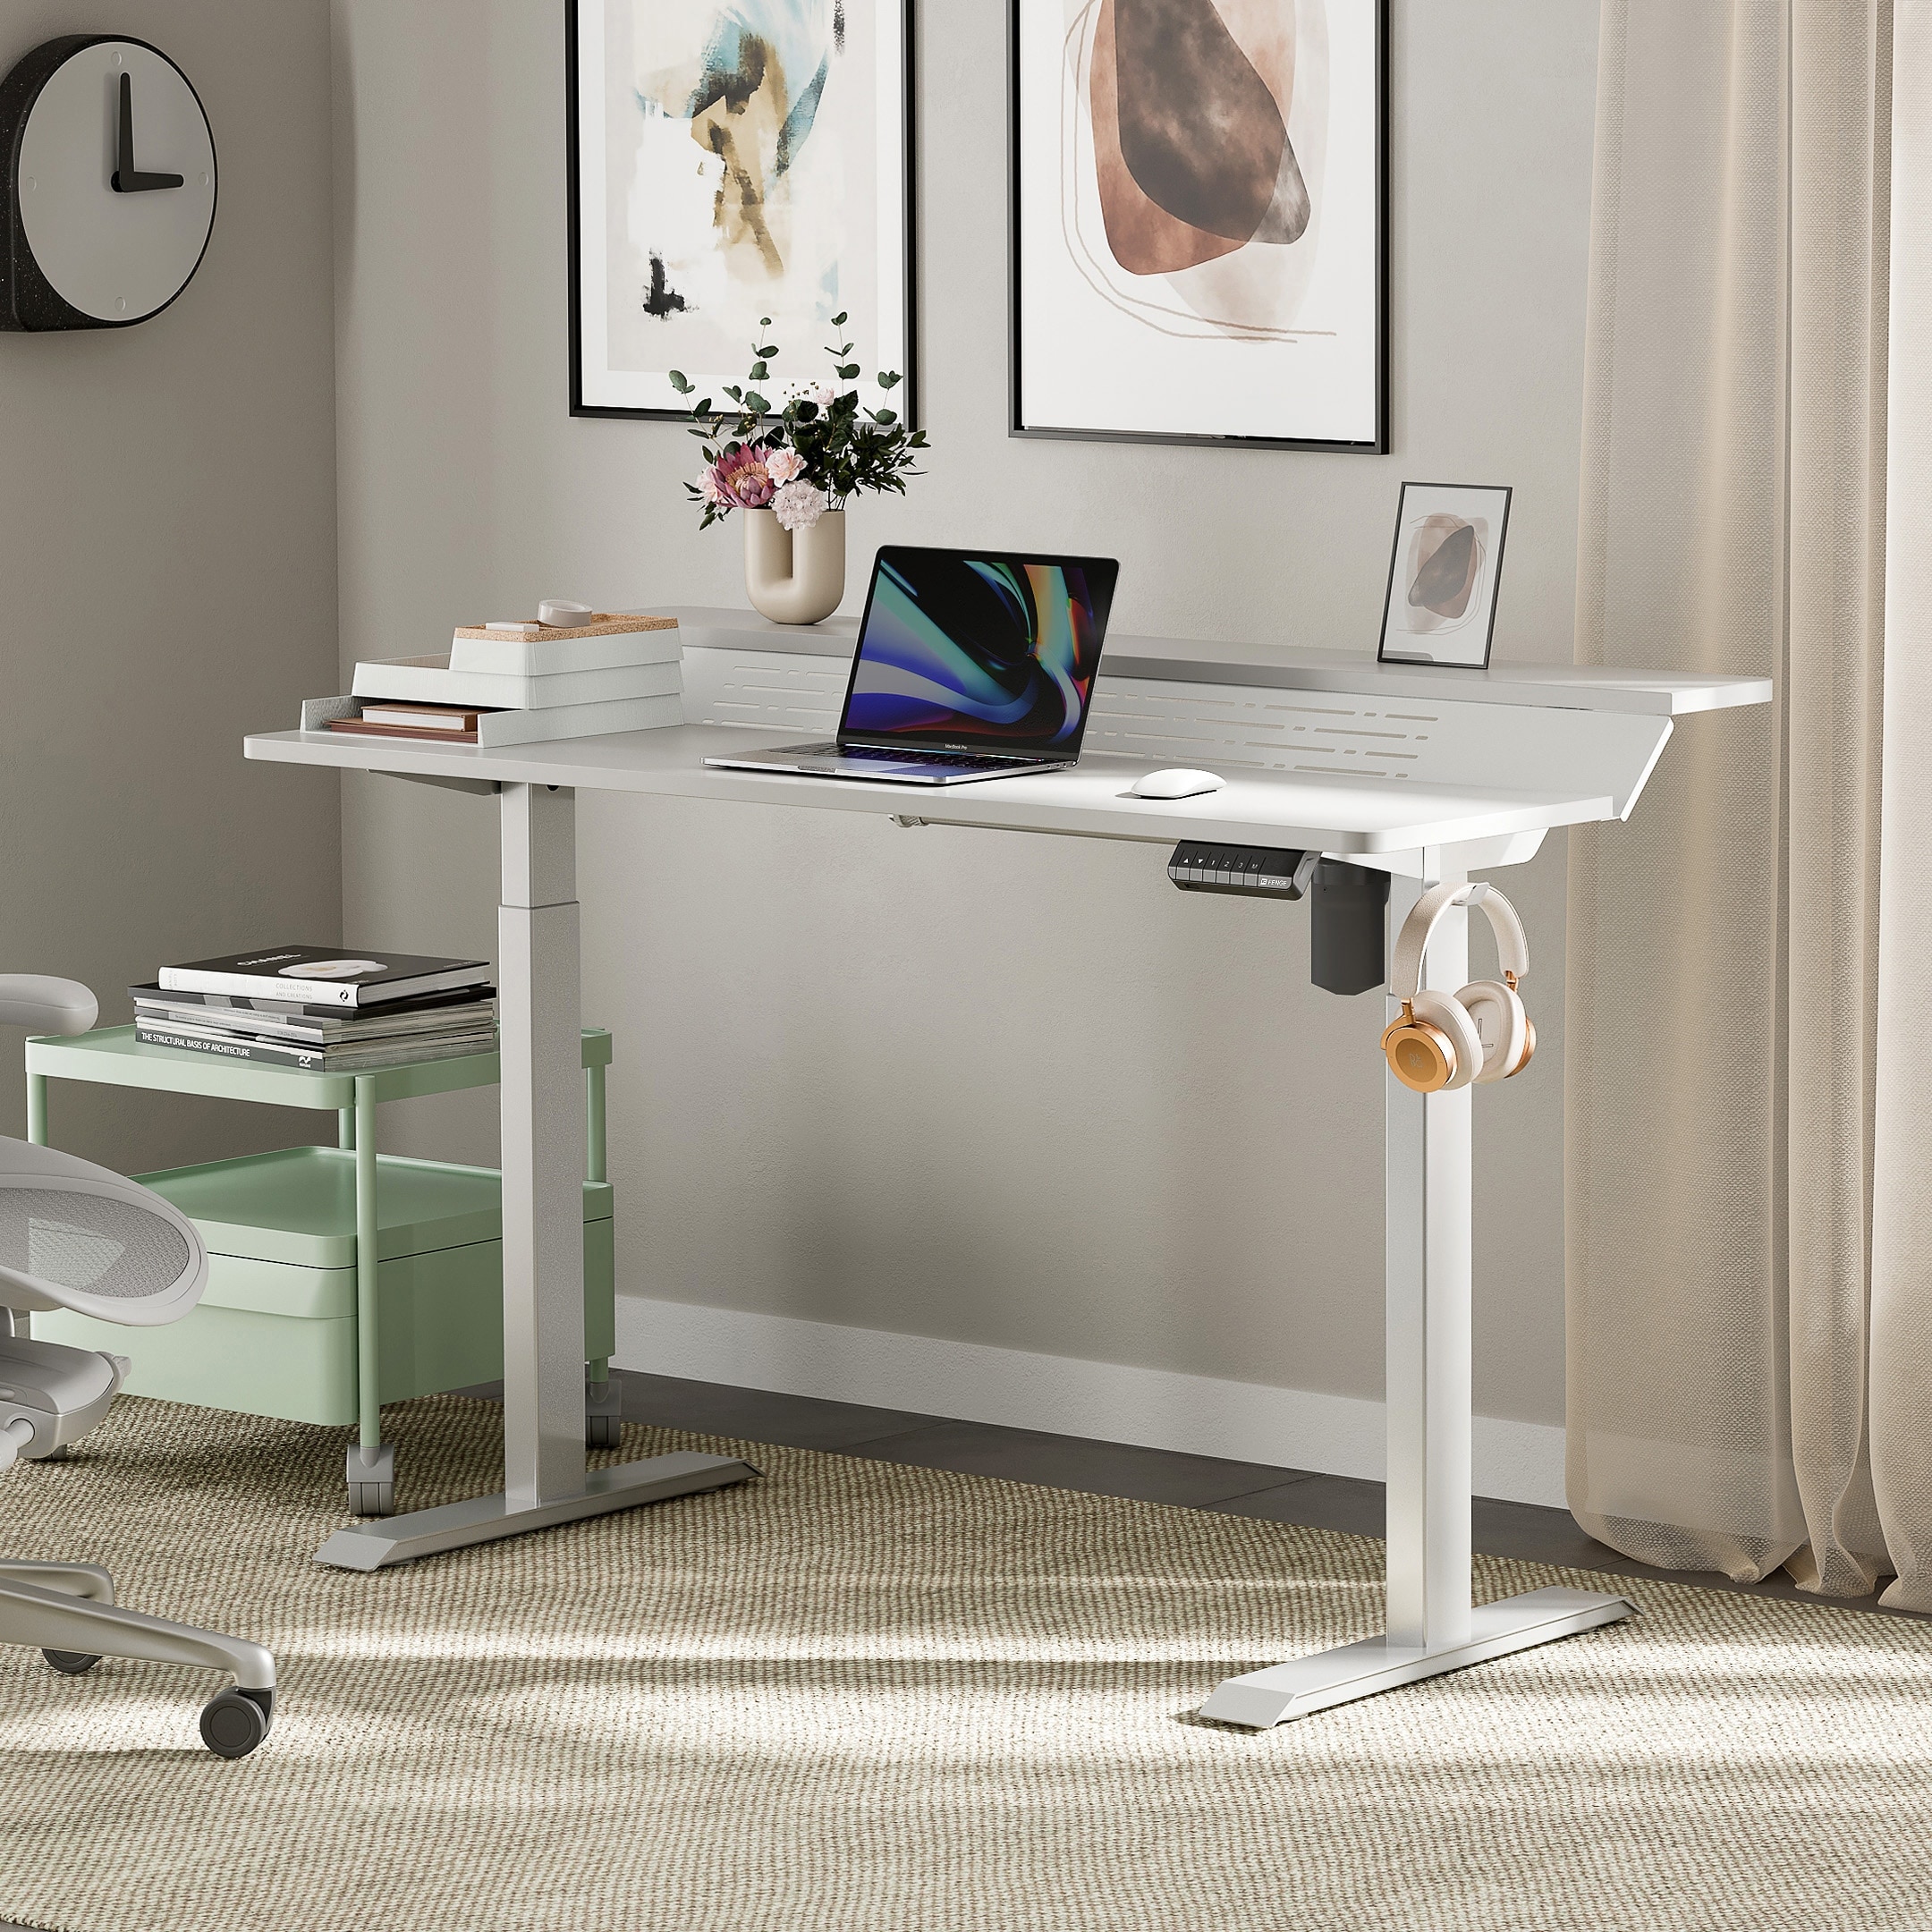 https://ak1.ostkcdn.com/images/products/is/images/direct/187e591d63f0ba63d17892fc1897d6eaea110de9/55-Inches-Piano-Standing-Desk-Electric-Height-Adjustable-Stand-up-Desk.jpg